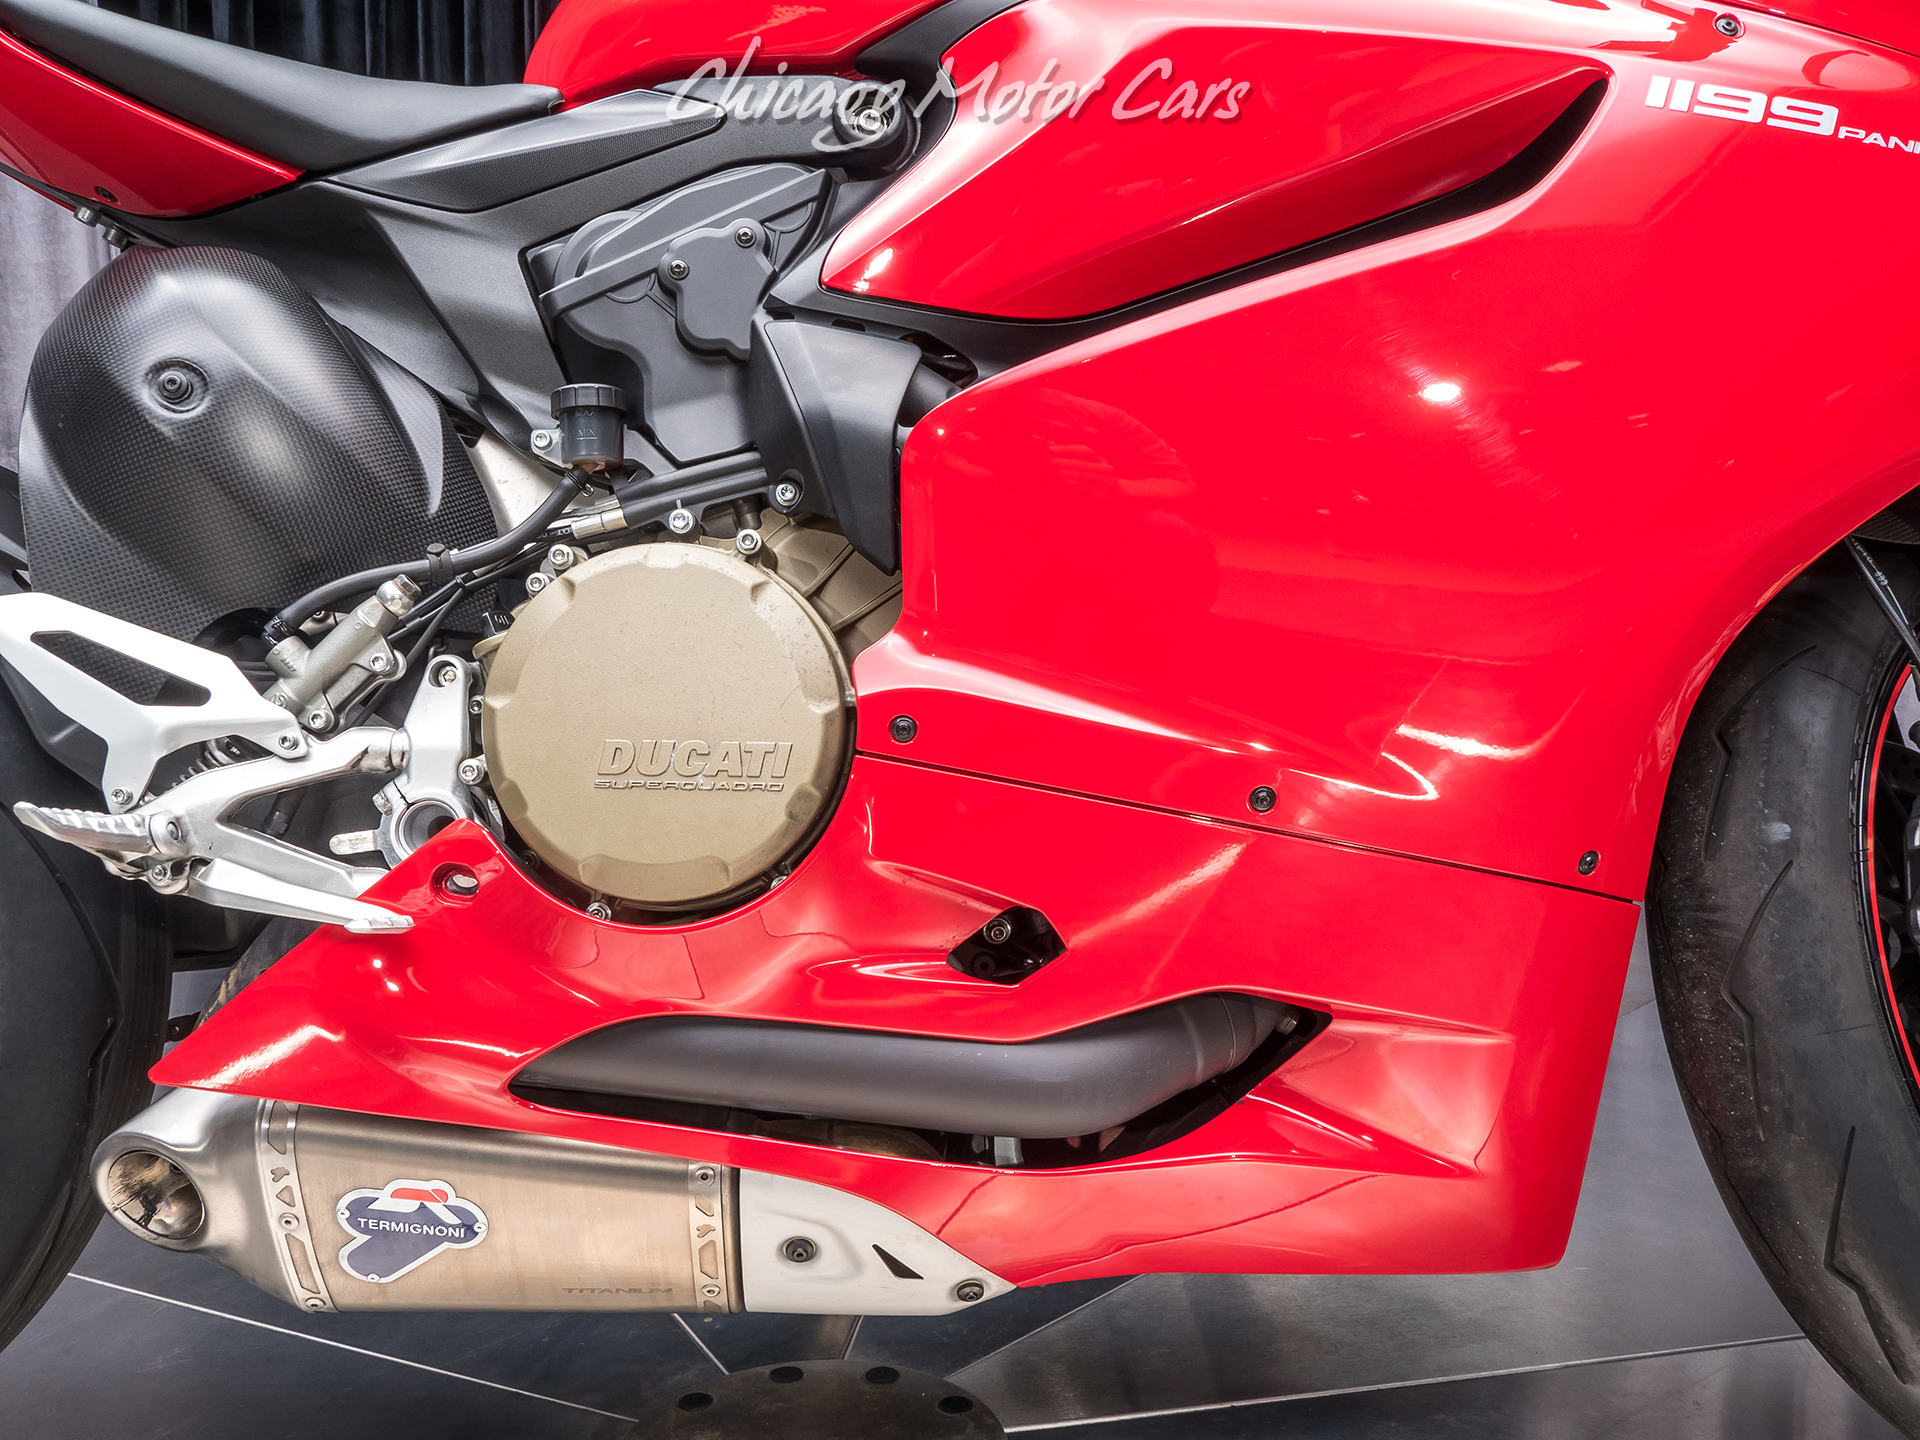 Used-2012-Ducati-1199-Panigale-S-Motorcycle